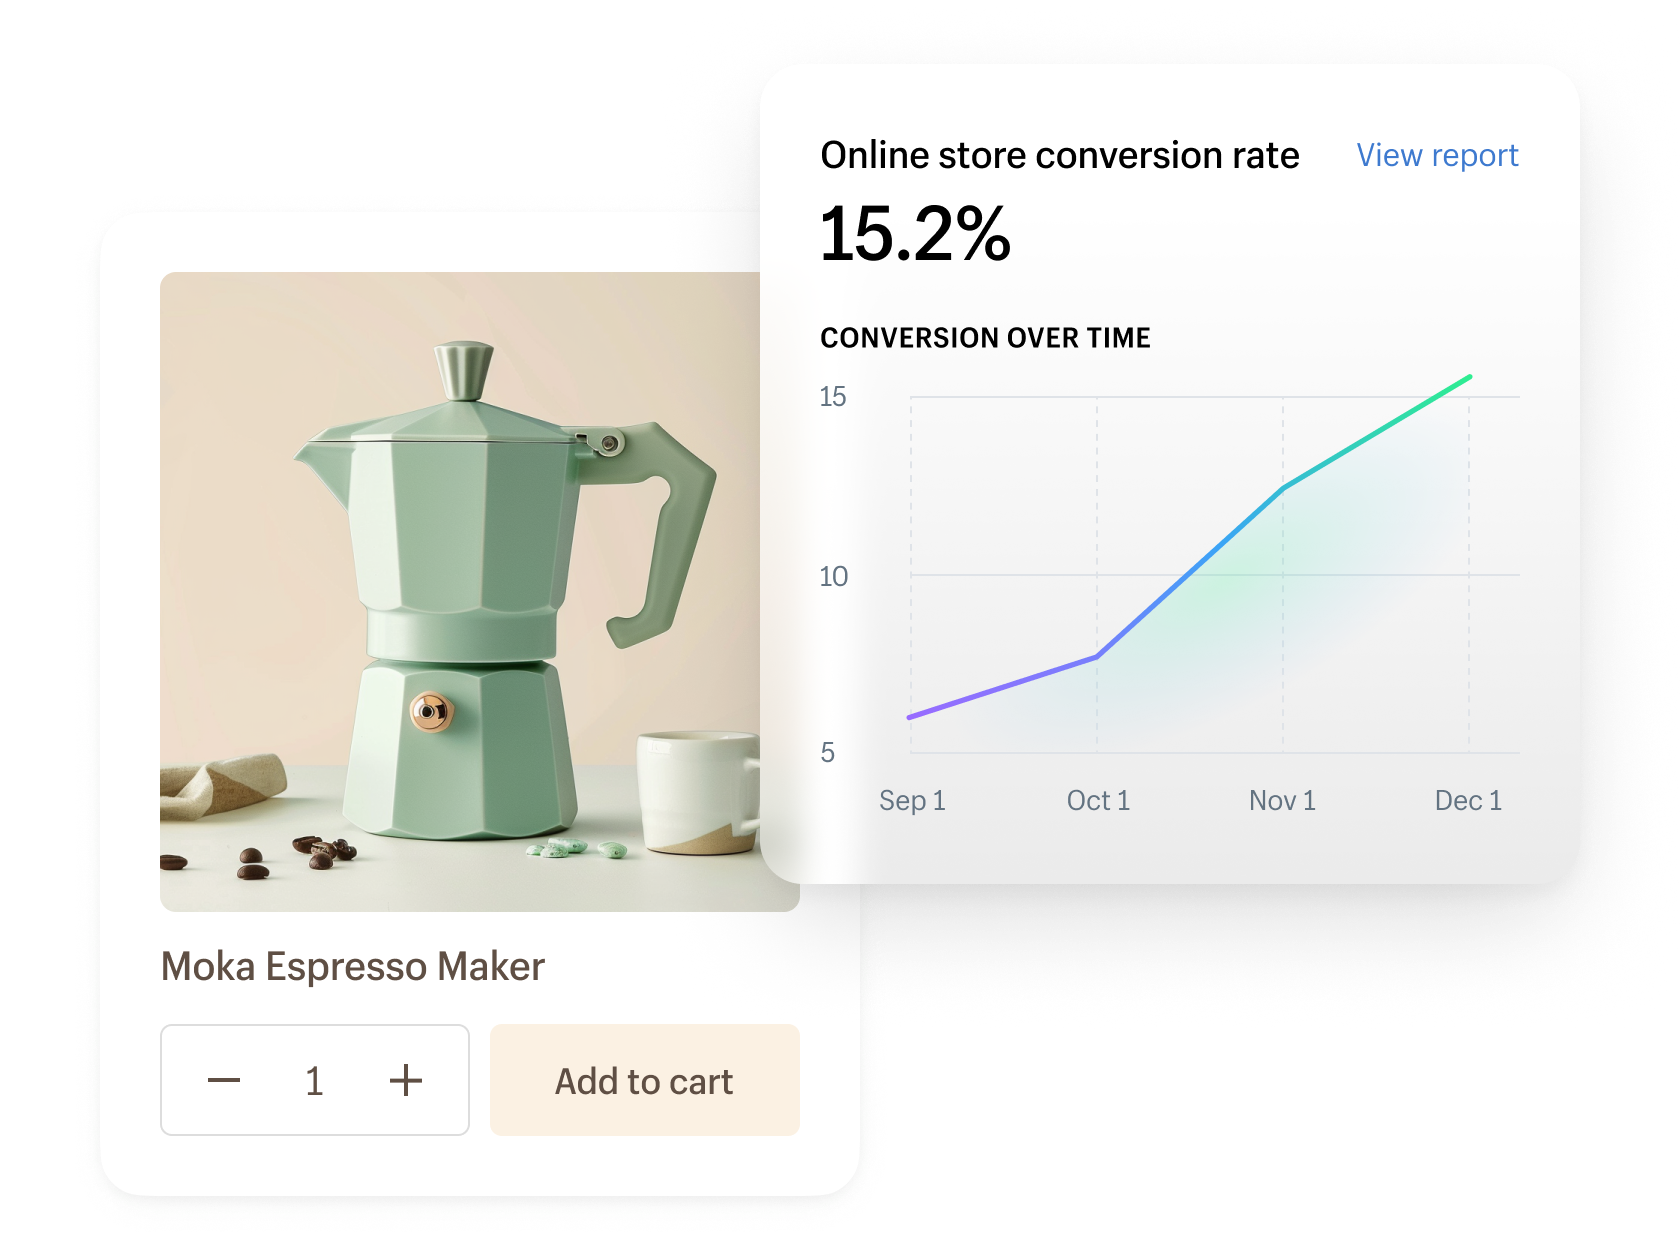 Image collage, showing a Moka Espresso Maker and a graph representing an online store’s conversion rate.